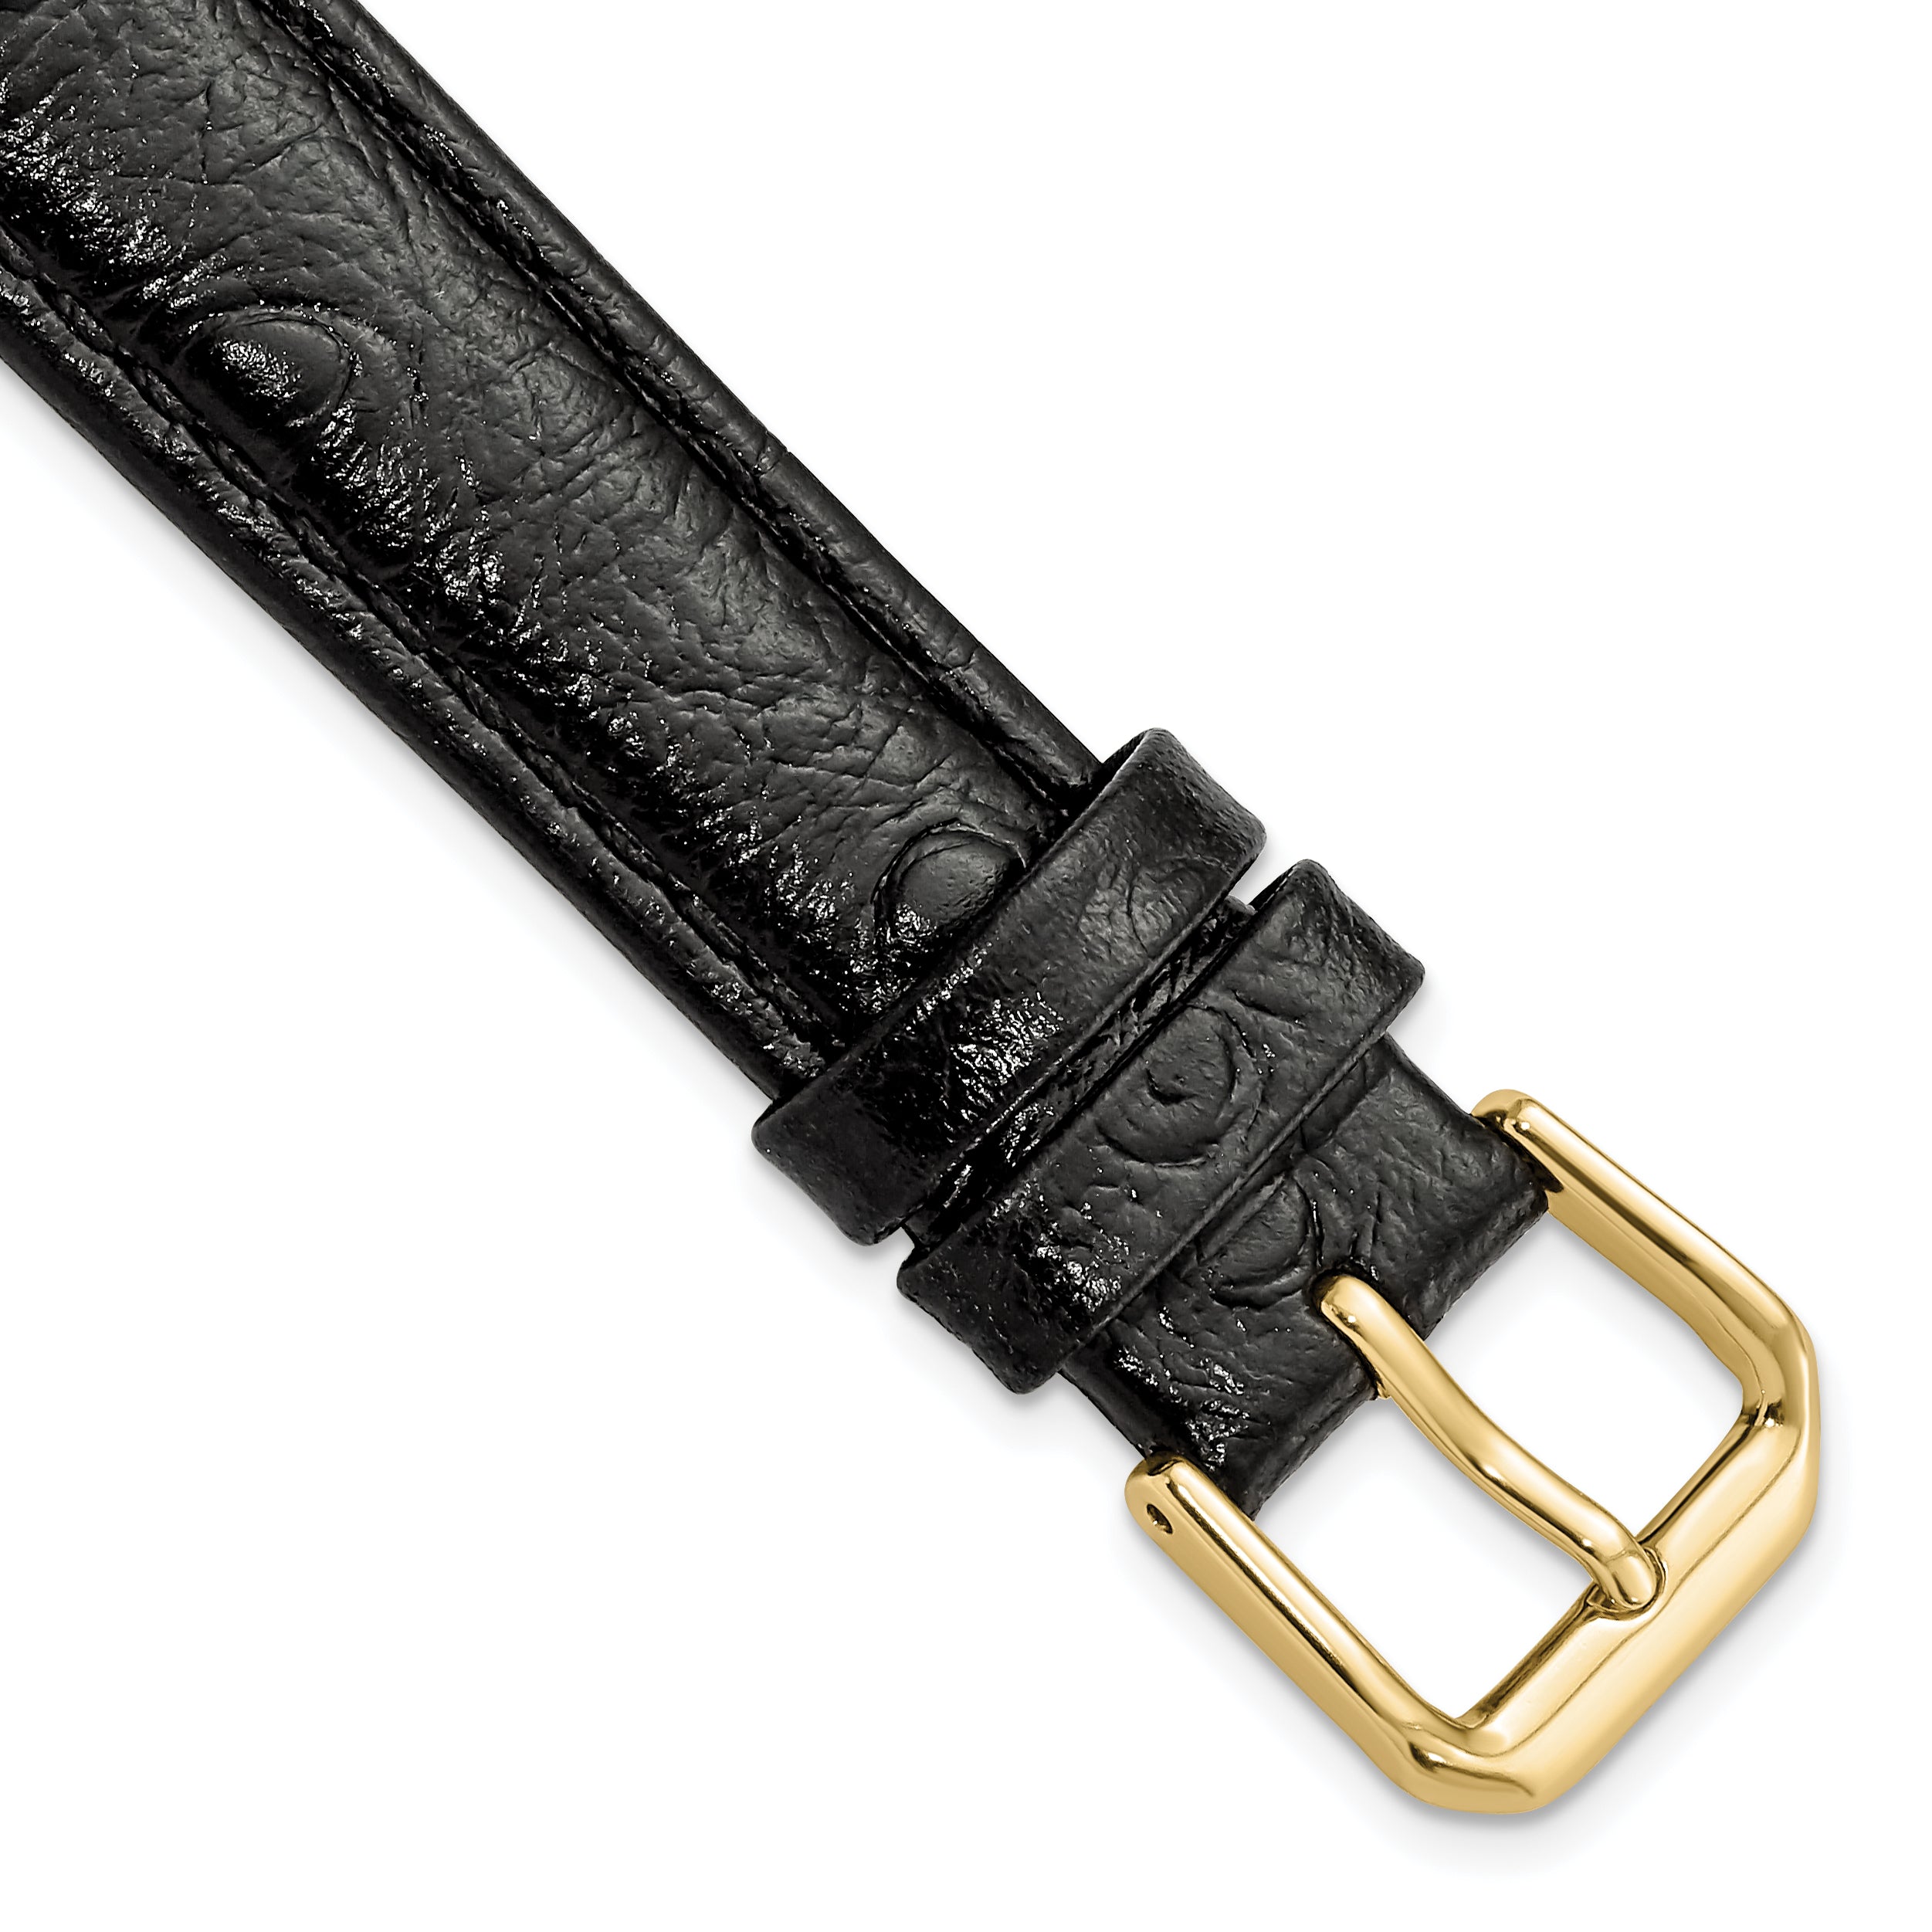 DeBeer 16mm Black Ostrich Grain Leather with Gold-tone Buckle 7.5 inch Watch Band